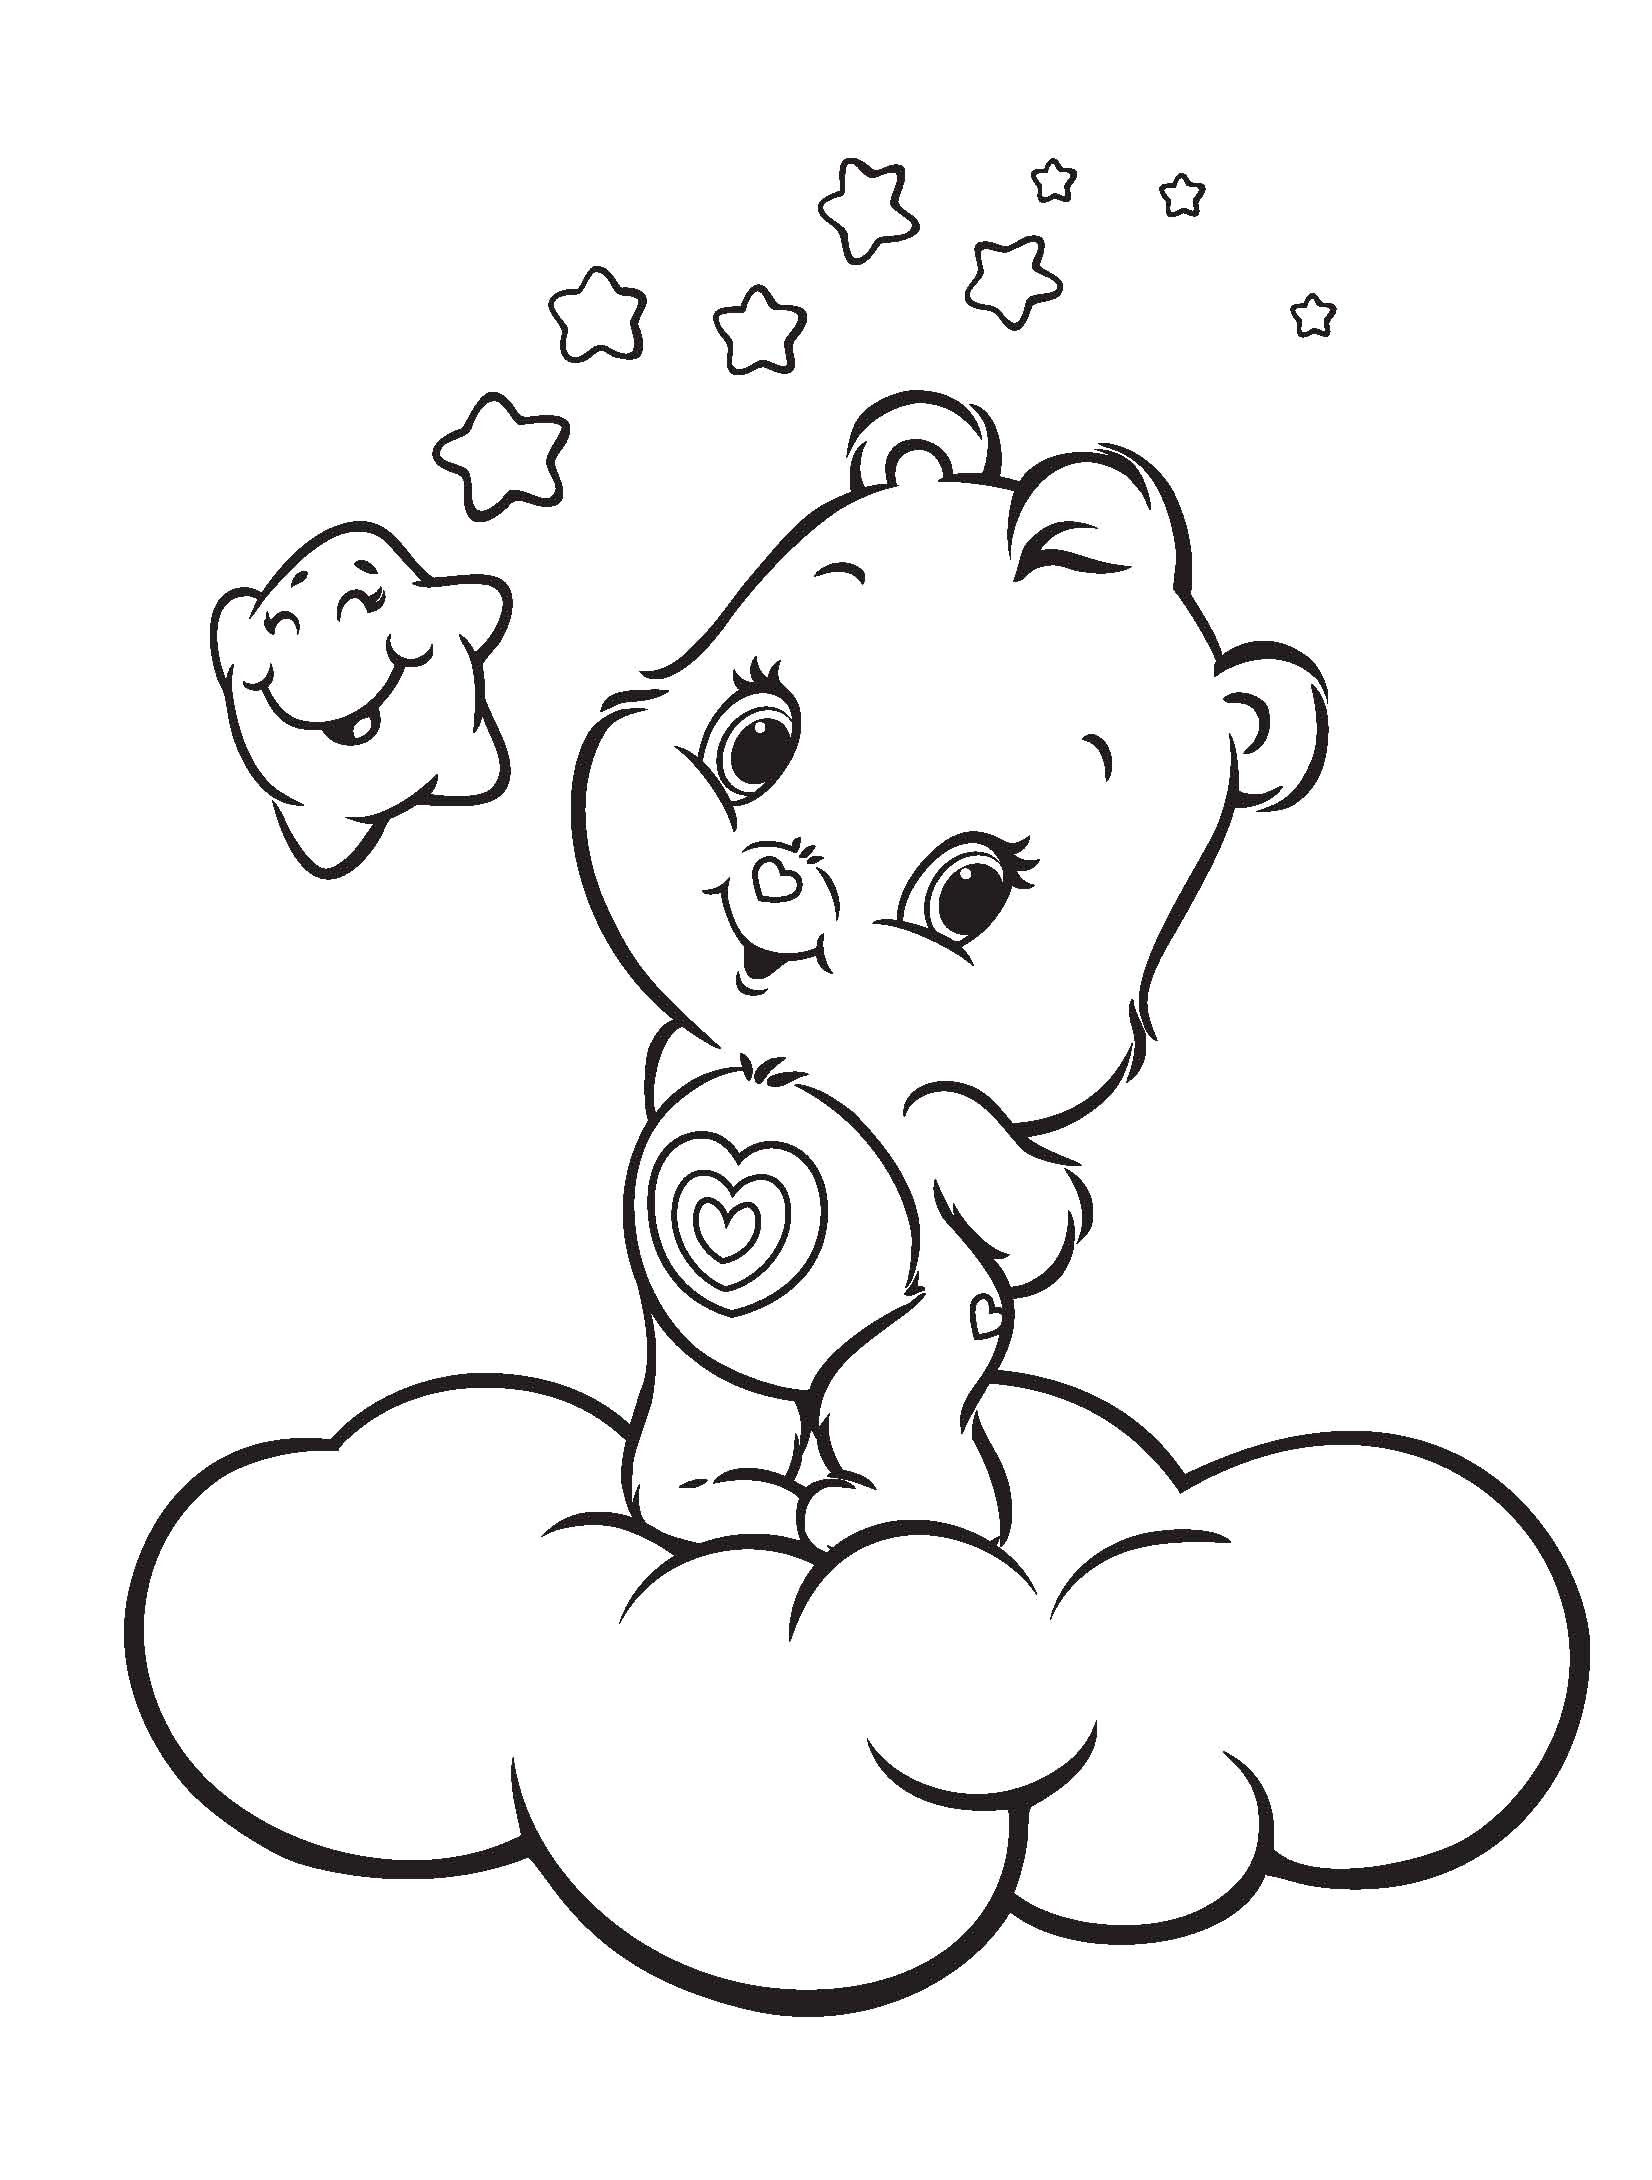 Coloring Pages Of Black Bears Ba Care Bears Coloring Pages Within Free Printable Bear Coloring